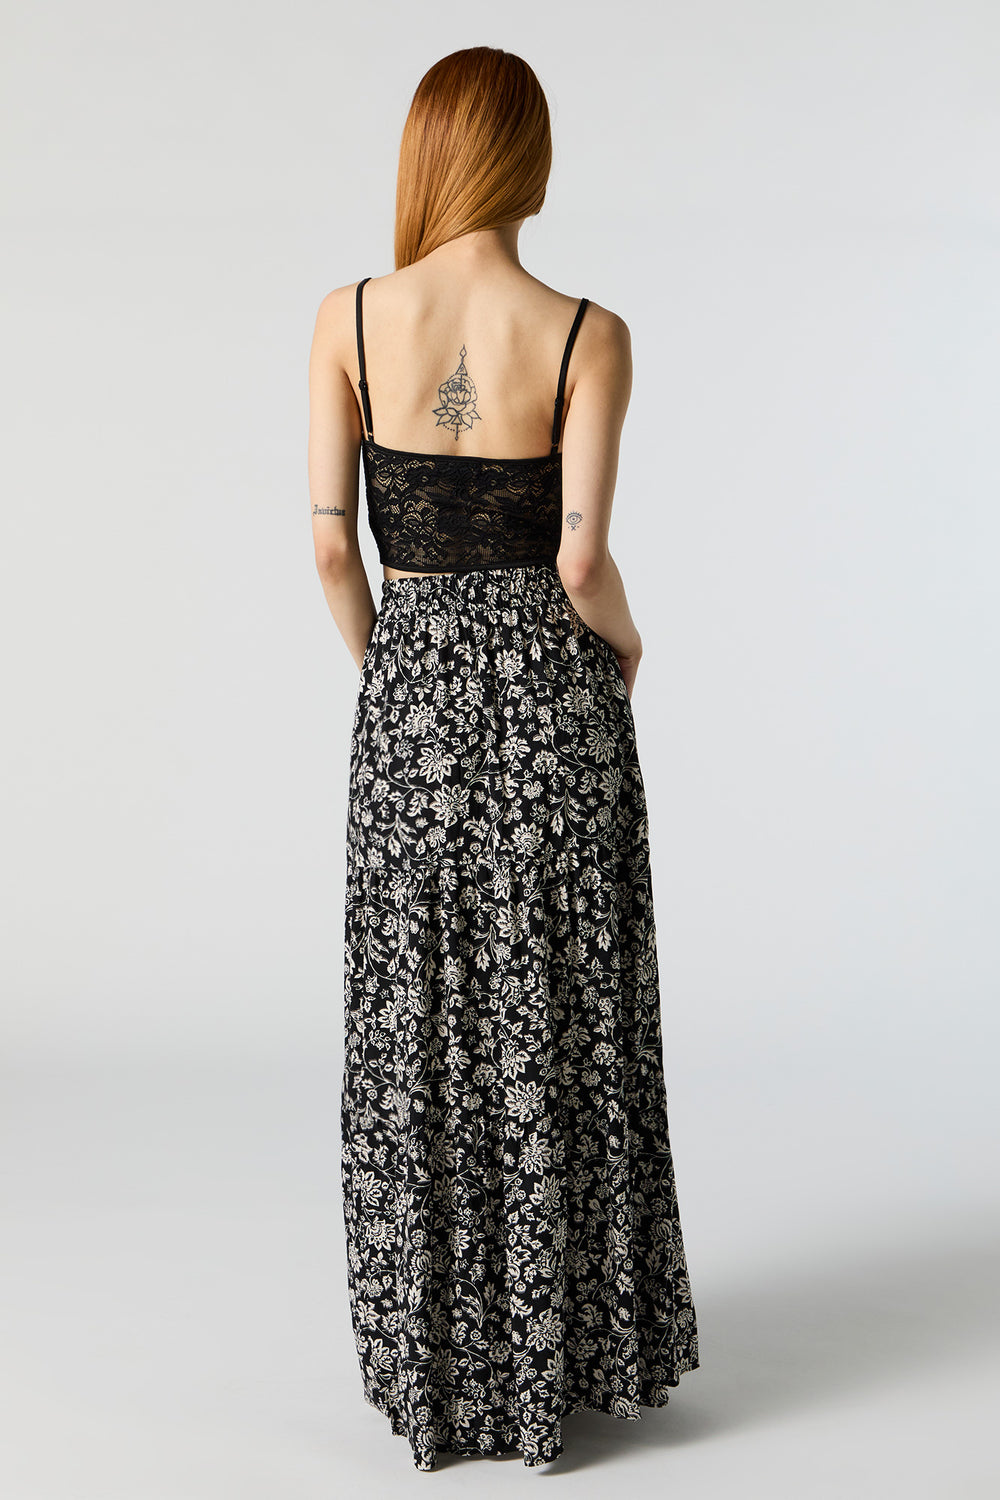 Black Floral High Rise Tiered Maxi Skirt Black Floral High Rise Tiered Maxi Skirt 3